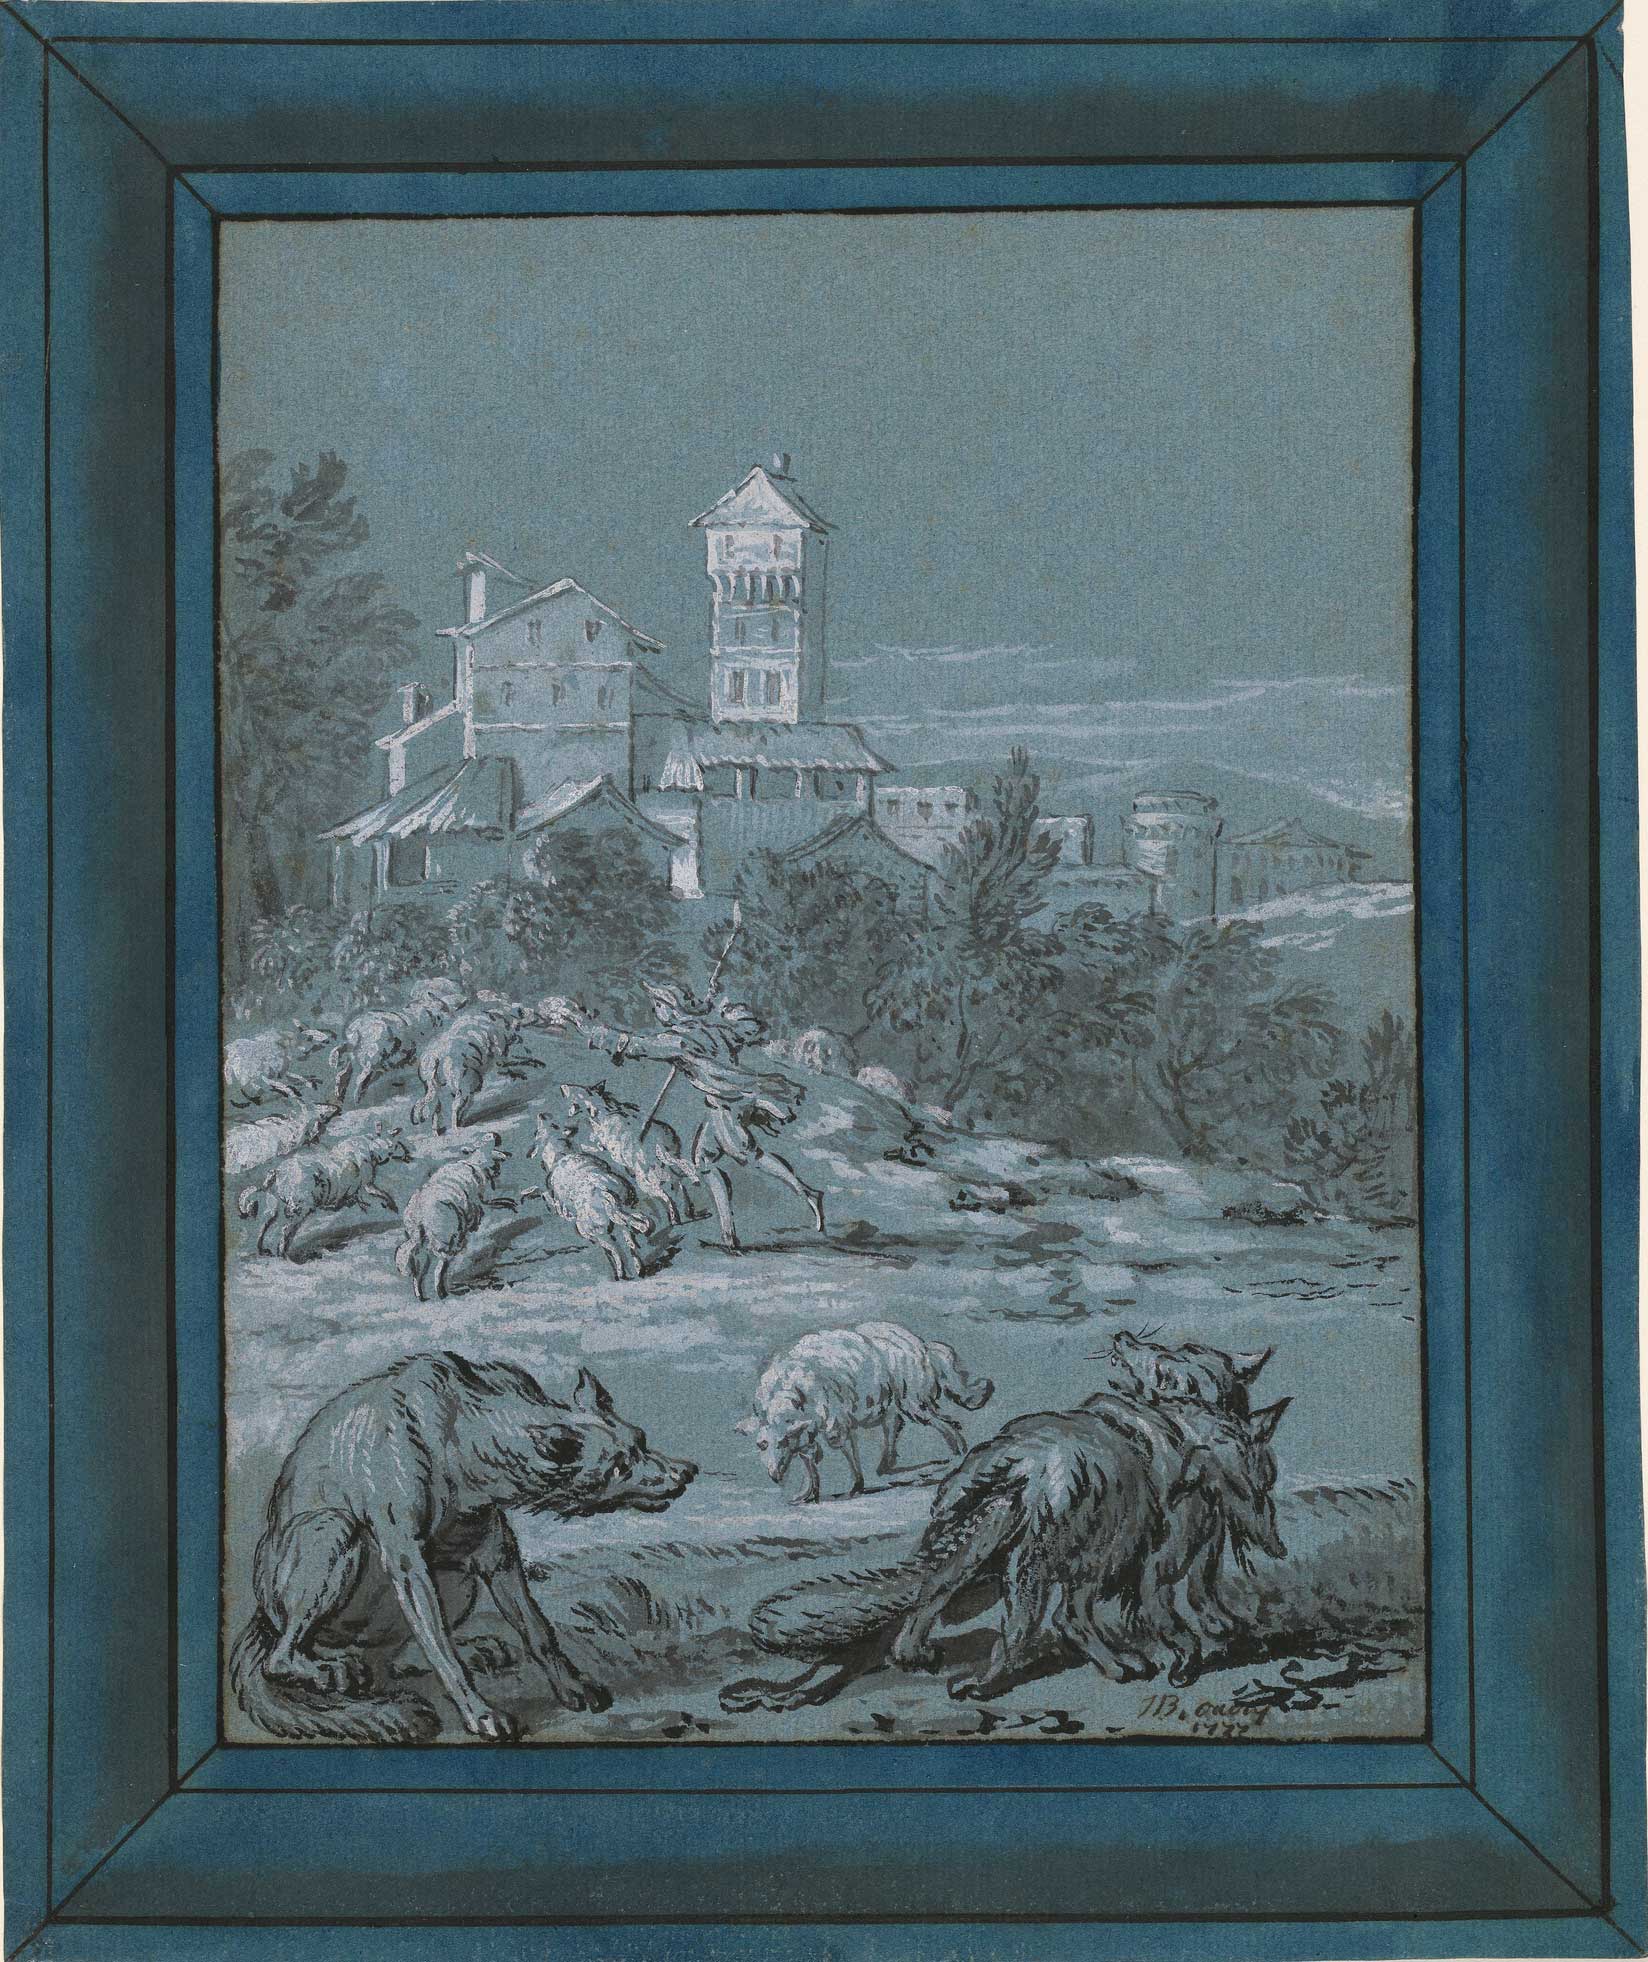 Drawing on blue - Jean-Baptiste Oudry, "The Wolf and the Fox"